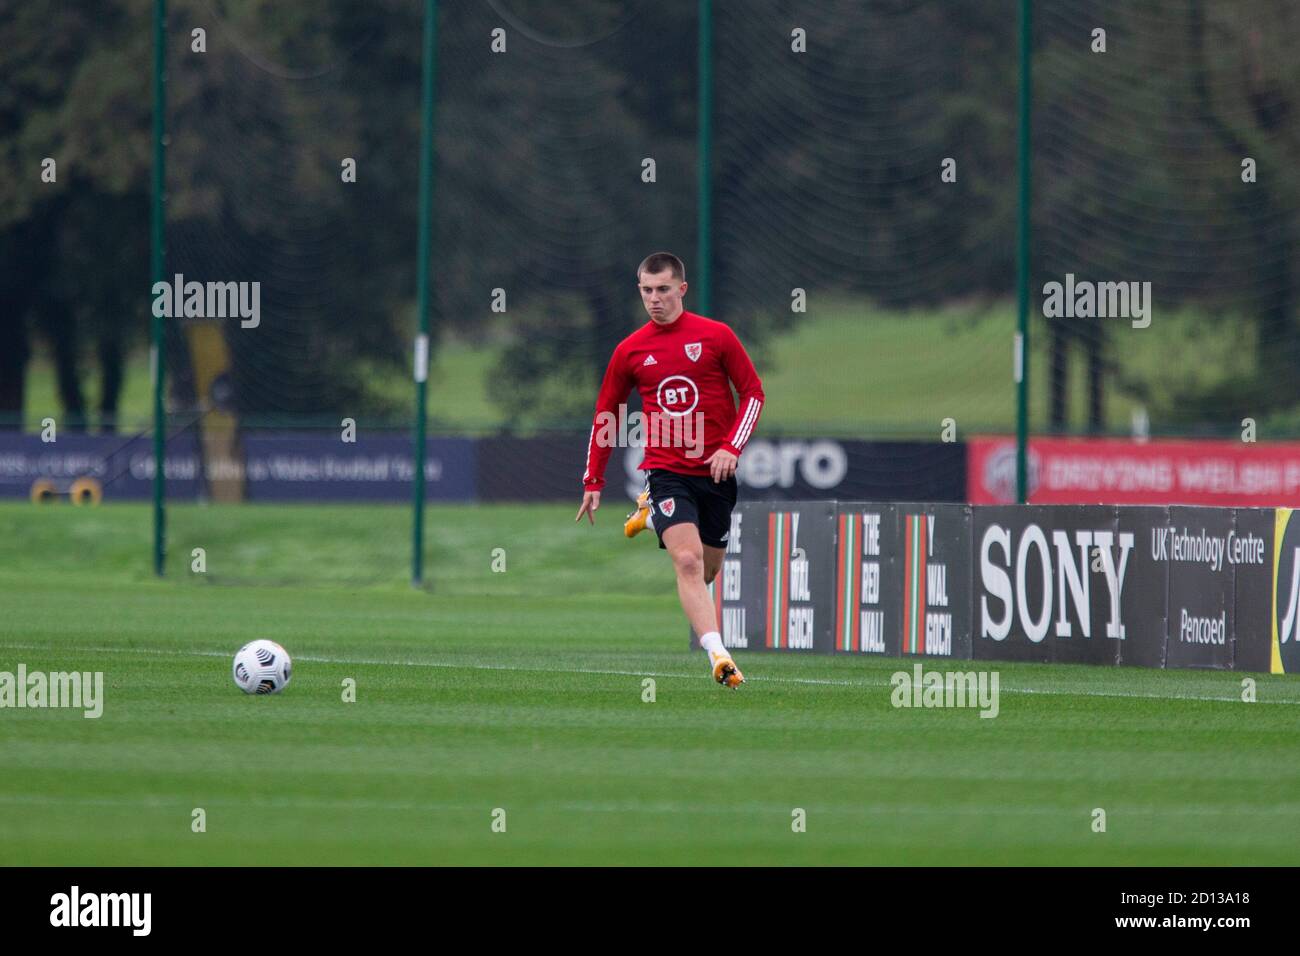 Hensol, Wales, UK. 5th Oct, 2020. Ben Woodburn during Wales national football team training ahead of matches against England, Republic of Ireland and Bulgaria. Credit: Mark Hawkins/Alamy Live News Stock Photo